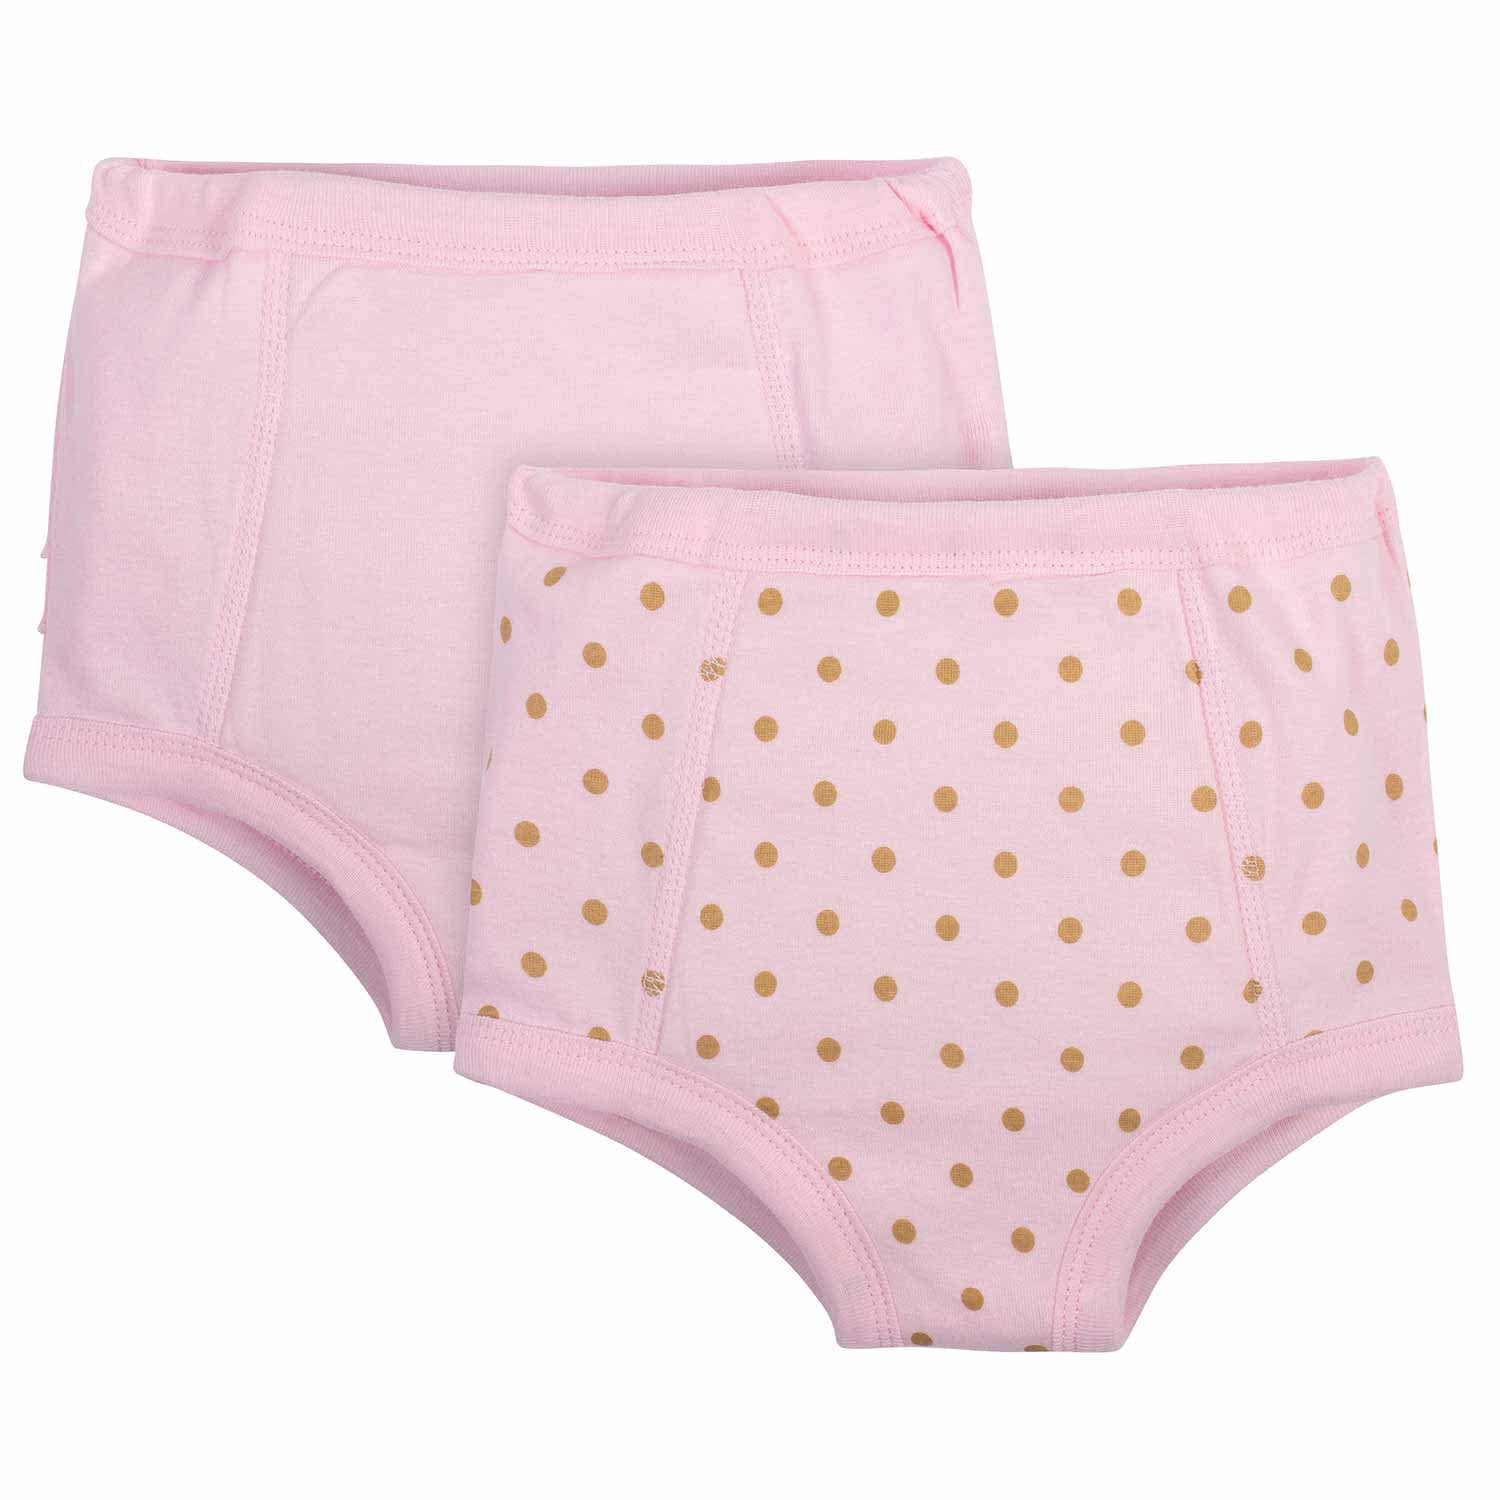 2-Pack Toddler Girls Dots Training Pants With Tpu Lining-Gerber Childrenswear Wholesale